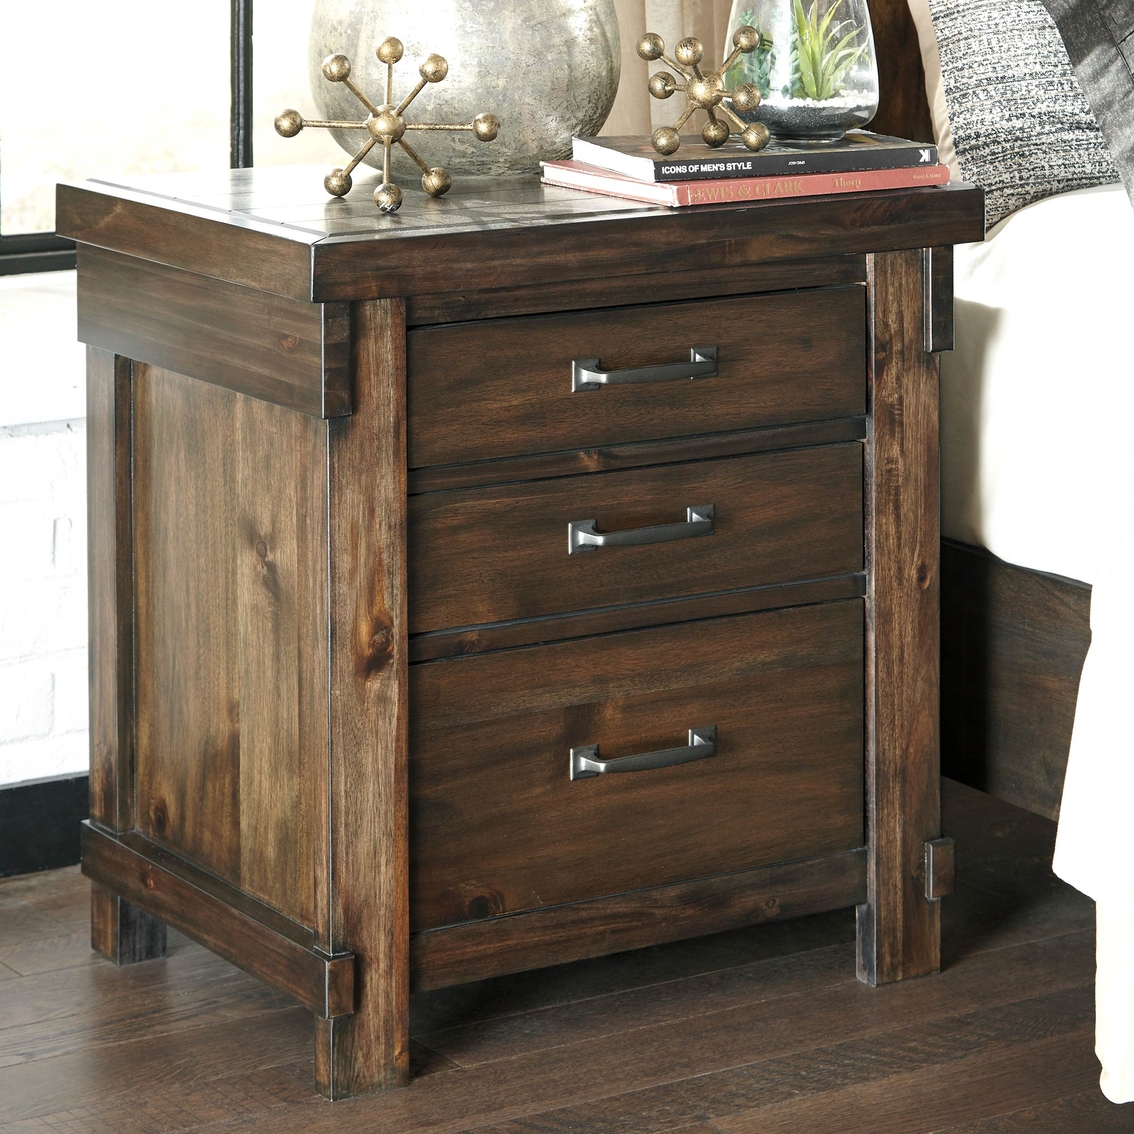 Signature Design by Ashley Lakeleigh Three Drawer Nightstand - Image 2 of 4